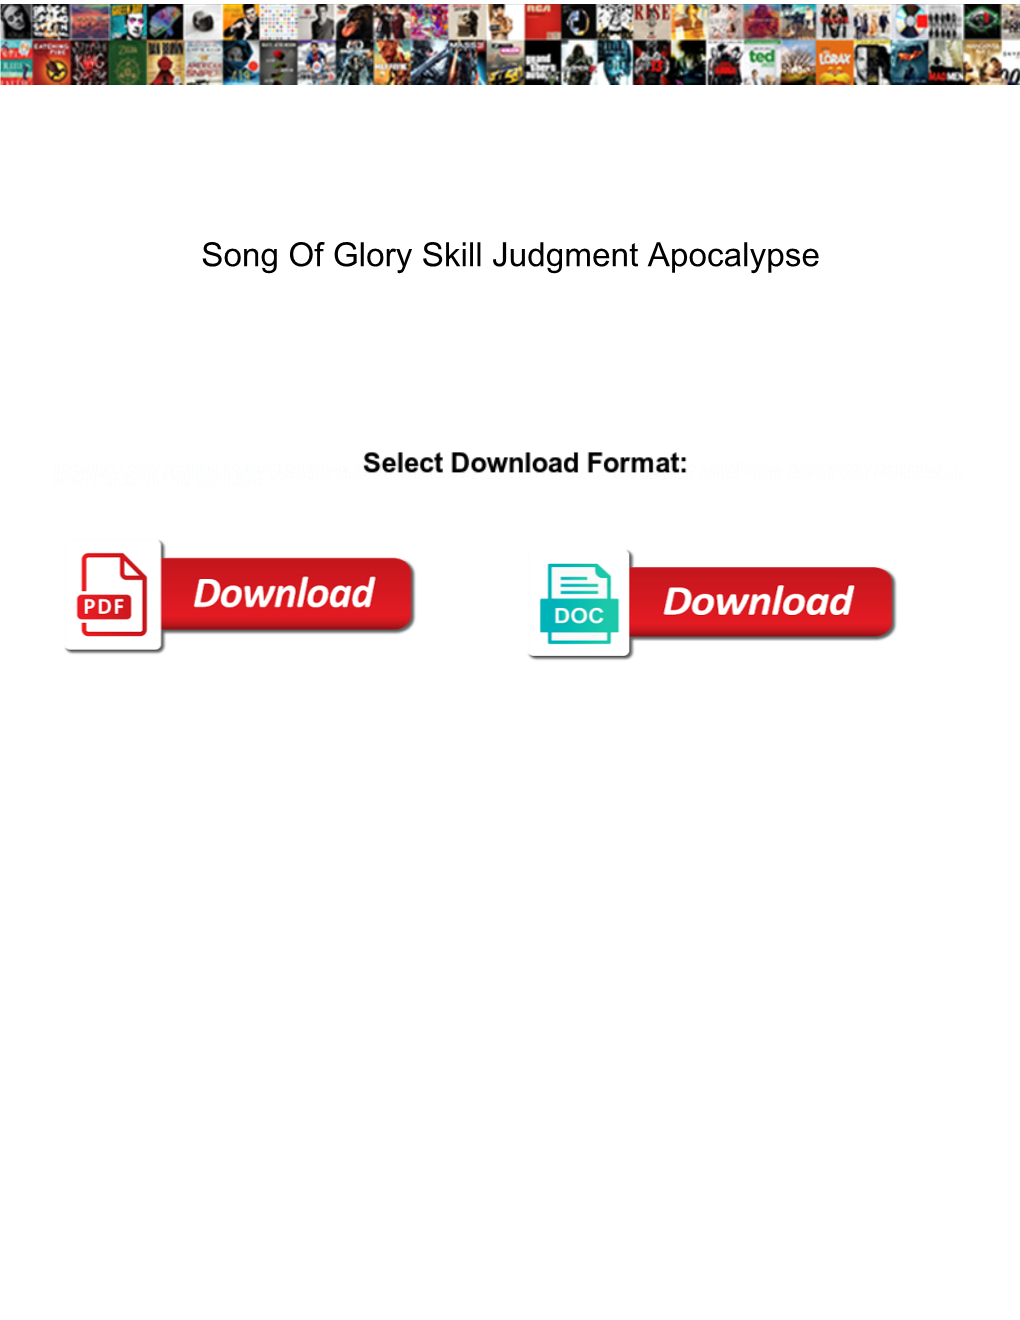 Song of Glory Skill Judgment Apocalypse